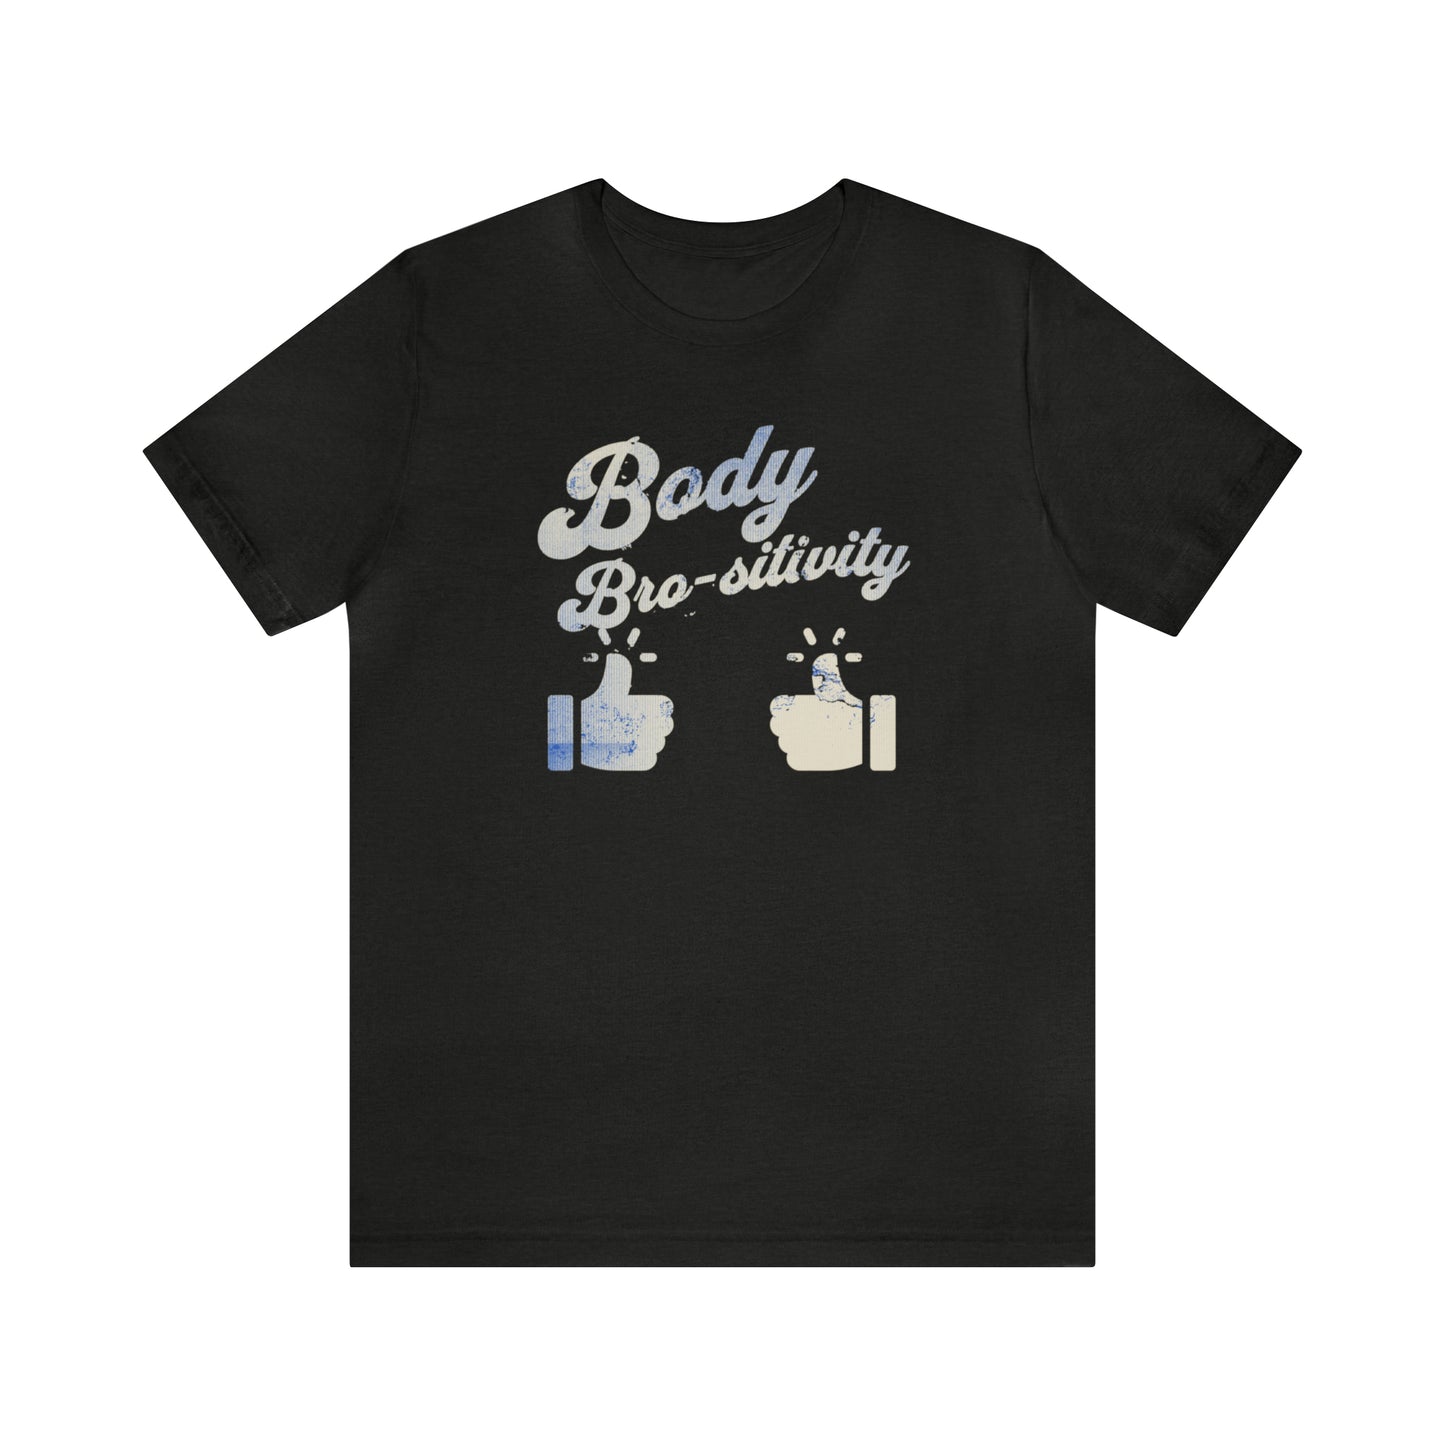 Body Bro-sitivity Unisex Jersey Short Sleeve Tee, Gym Motivation Shirt, Humorous Graphic T-shirt, Gift for Gym Enthusiast, Trendy Urban Top